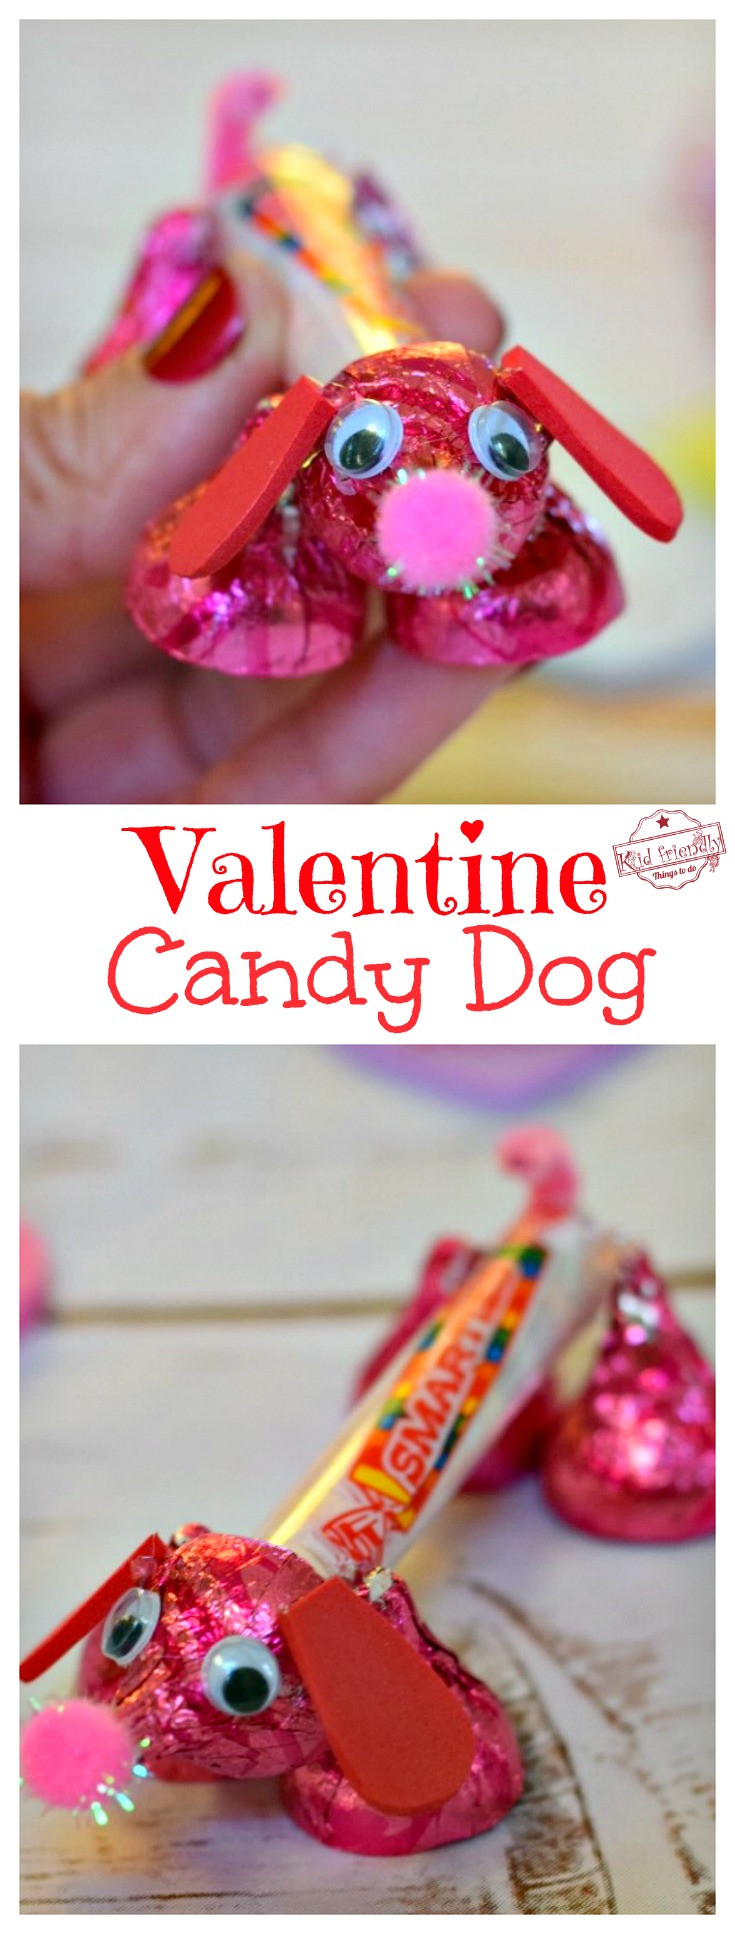 Valentines Day Candy Crafts
 Make A Valentine s Candy Dog for a Fun Kid s Craft and Treat